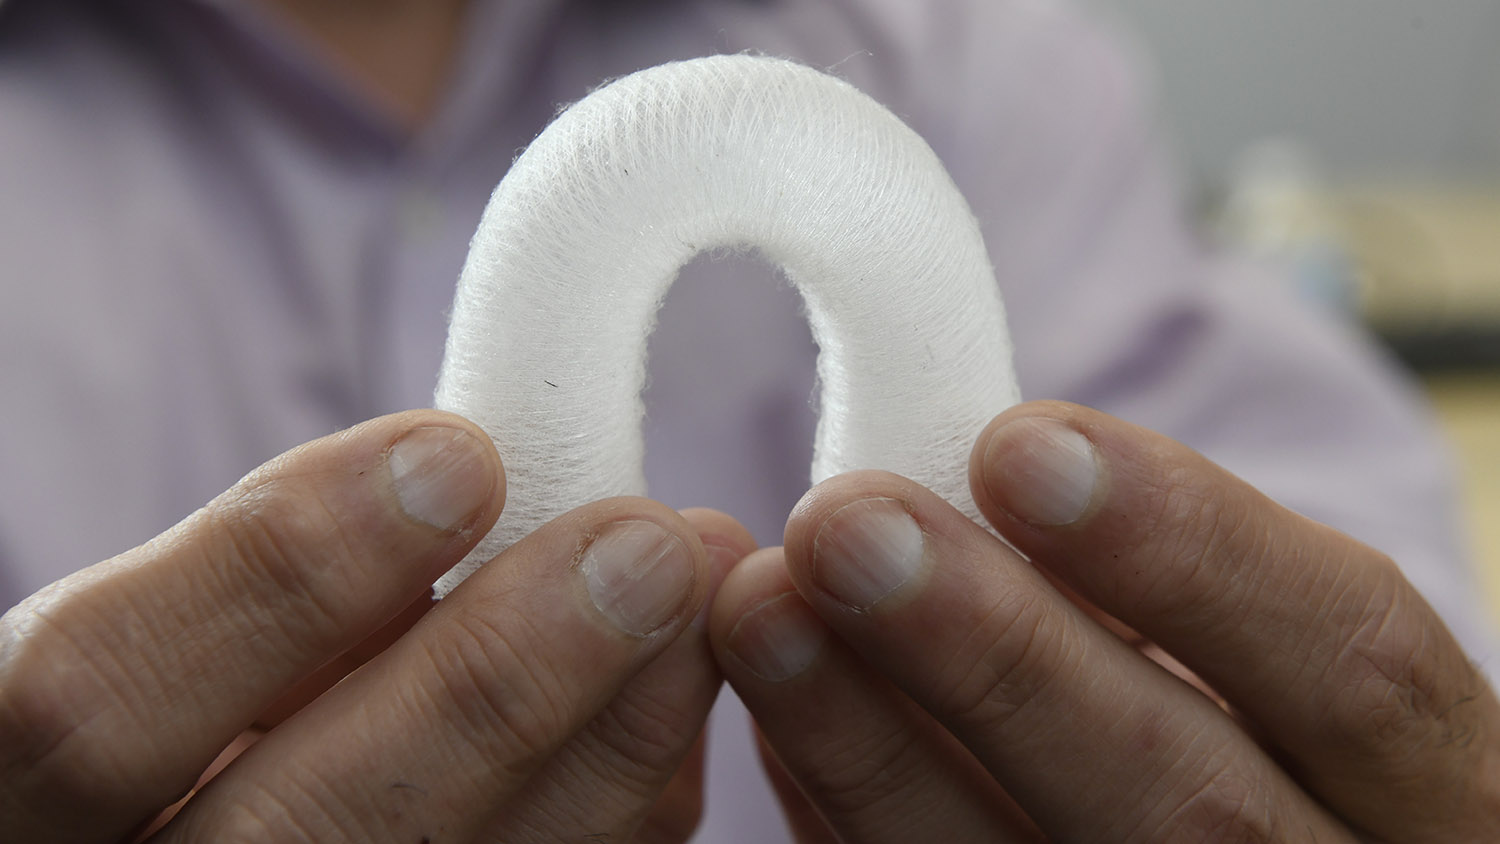 A 3D printed aorta created using the device is flexed to show the unique properties and structure of the fiber printed output.